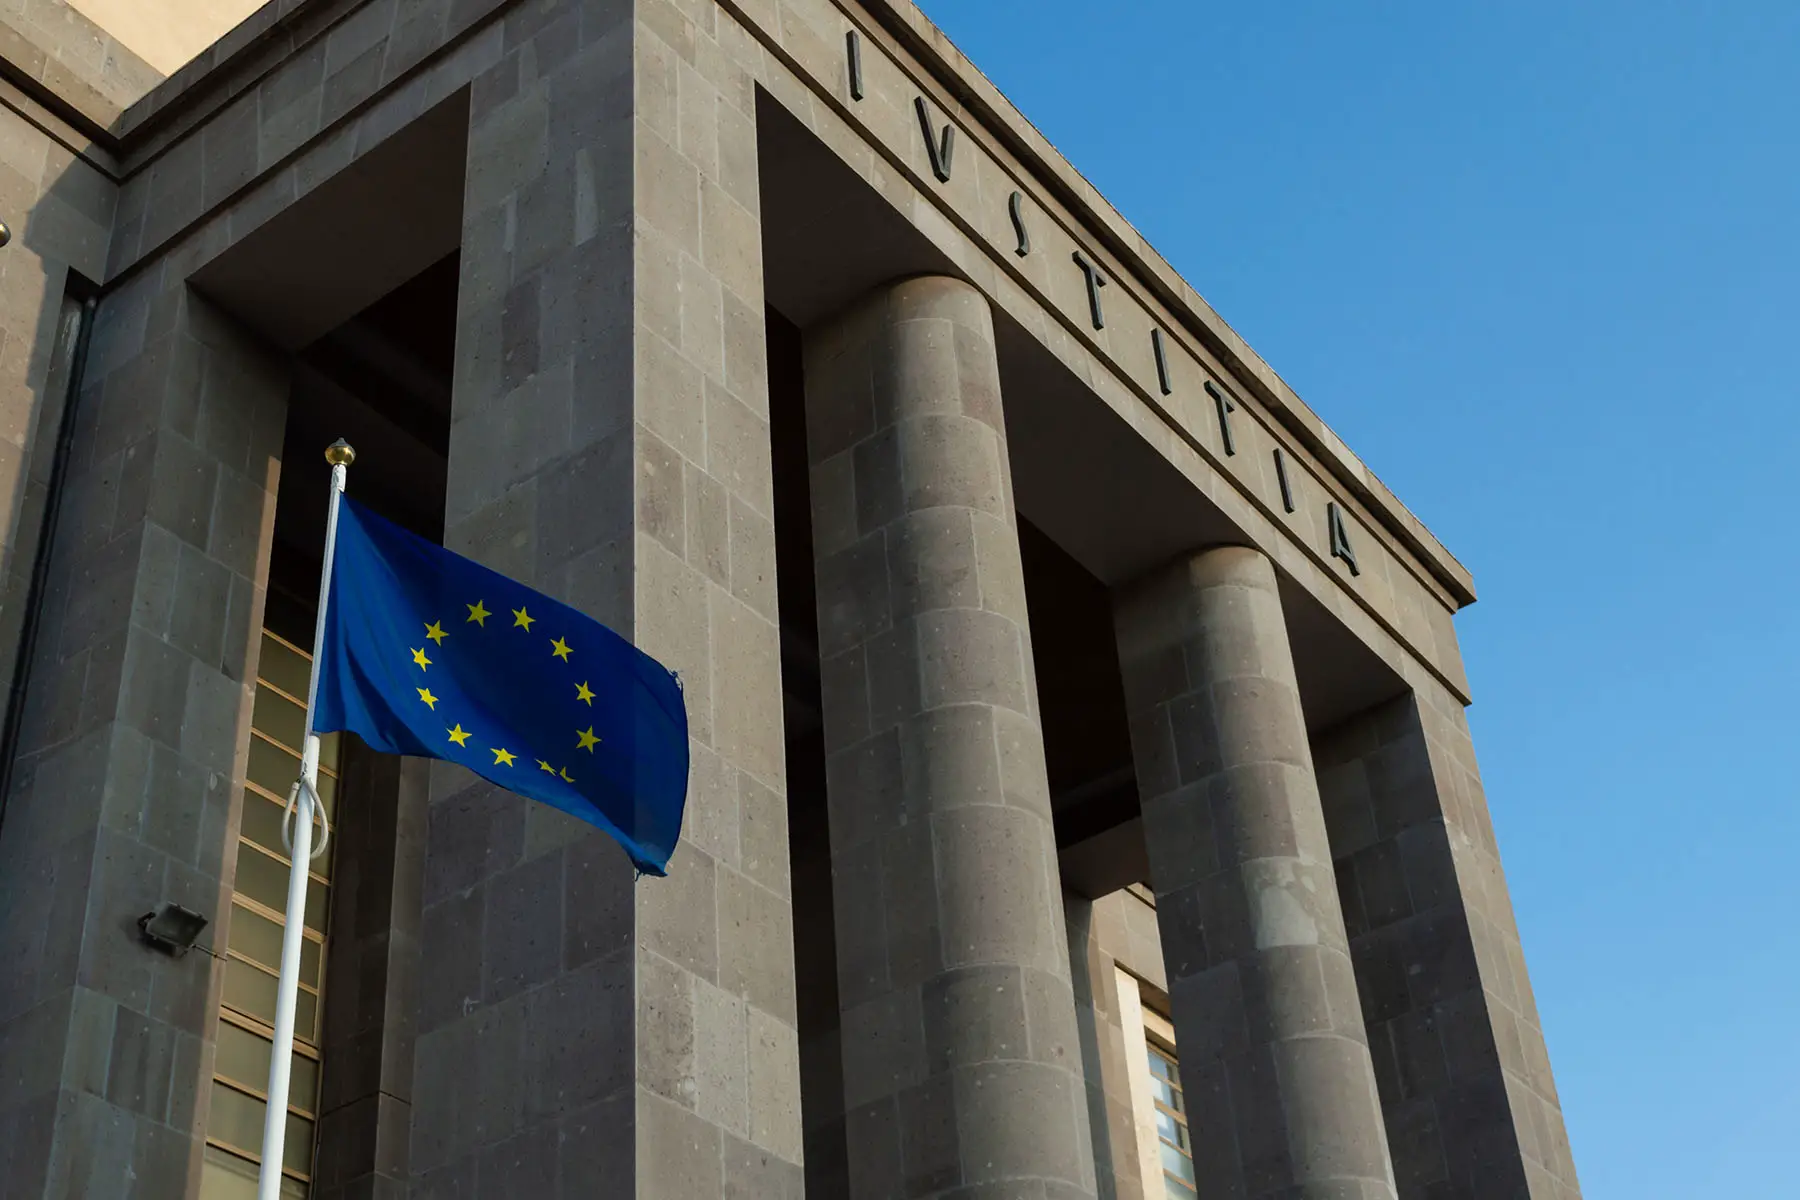 The European flag waving outside a tribunal with the latin word IUSTITIA ( Justice), in Cagliari, Italy.